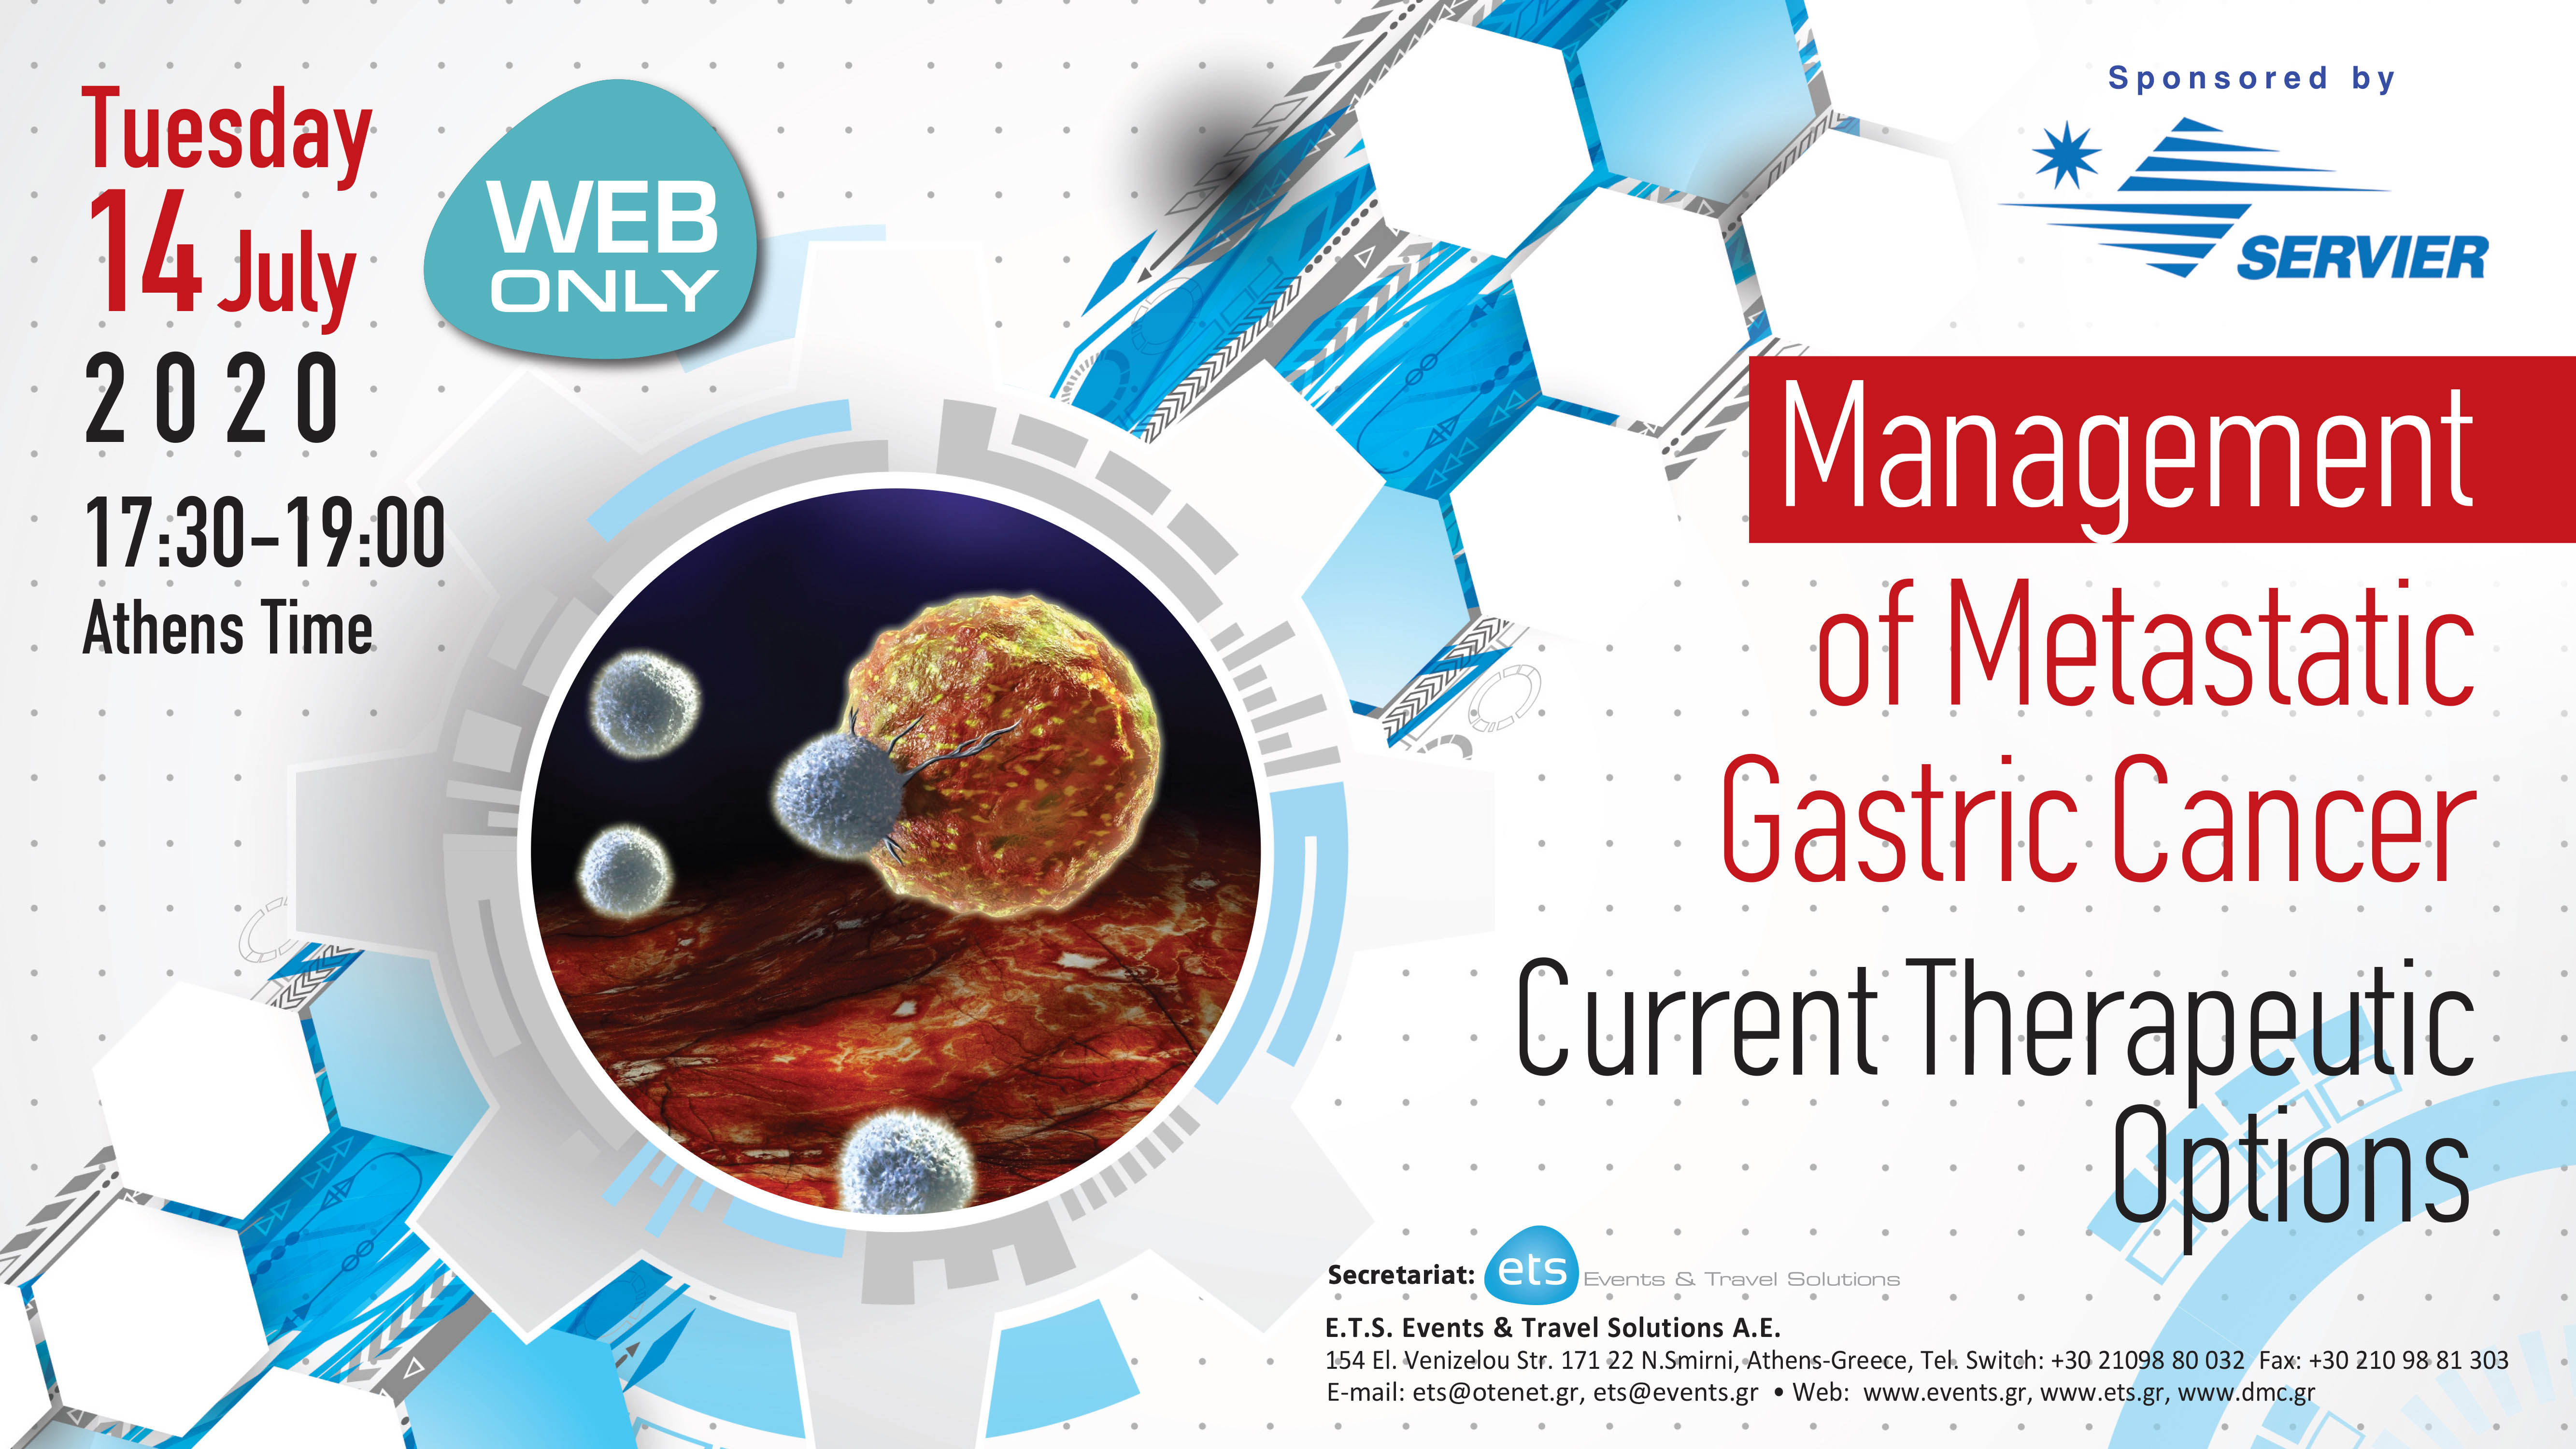 Management of metastatic Gastric Cancer. Current Therapeutic Options.